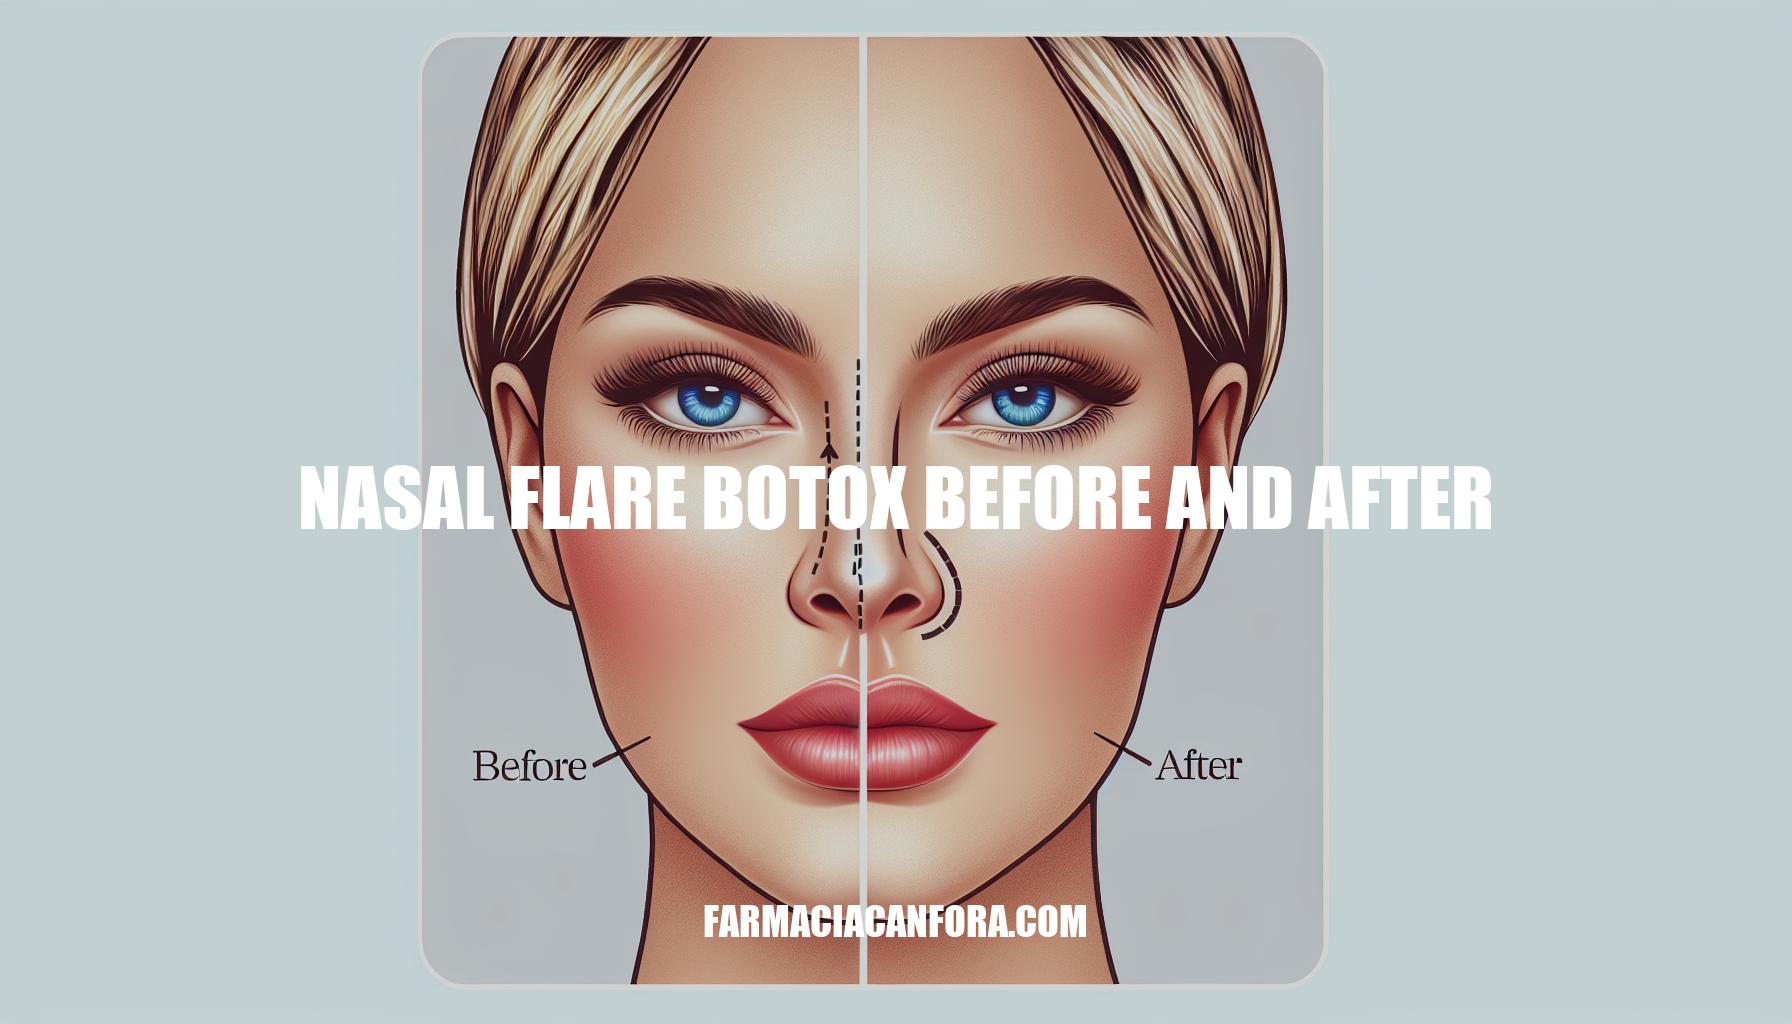 Nasal Flare Botox Before and After: Transform Your Facial Symmetry